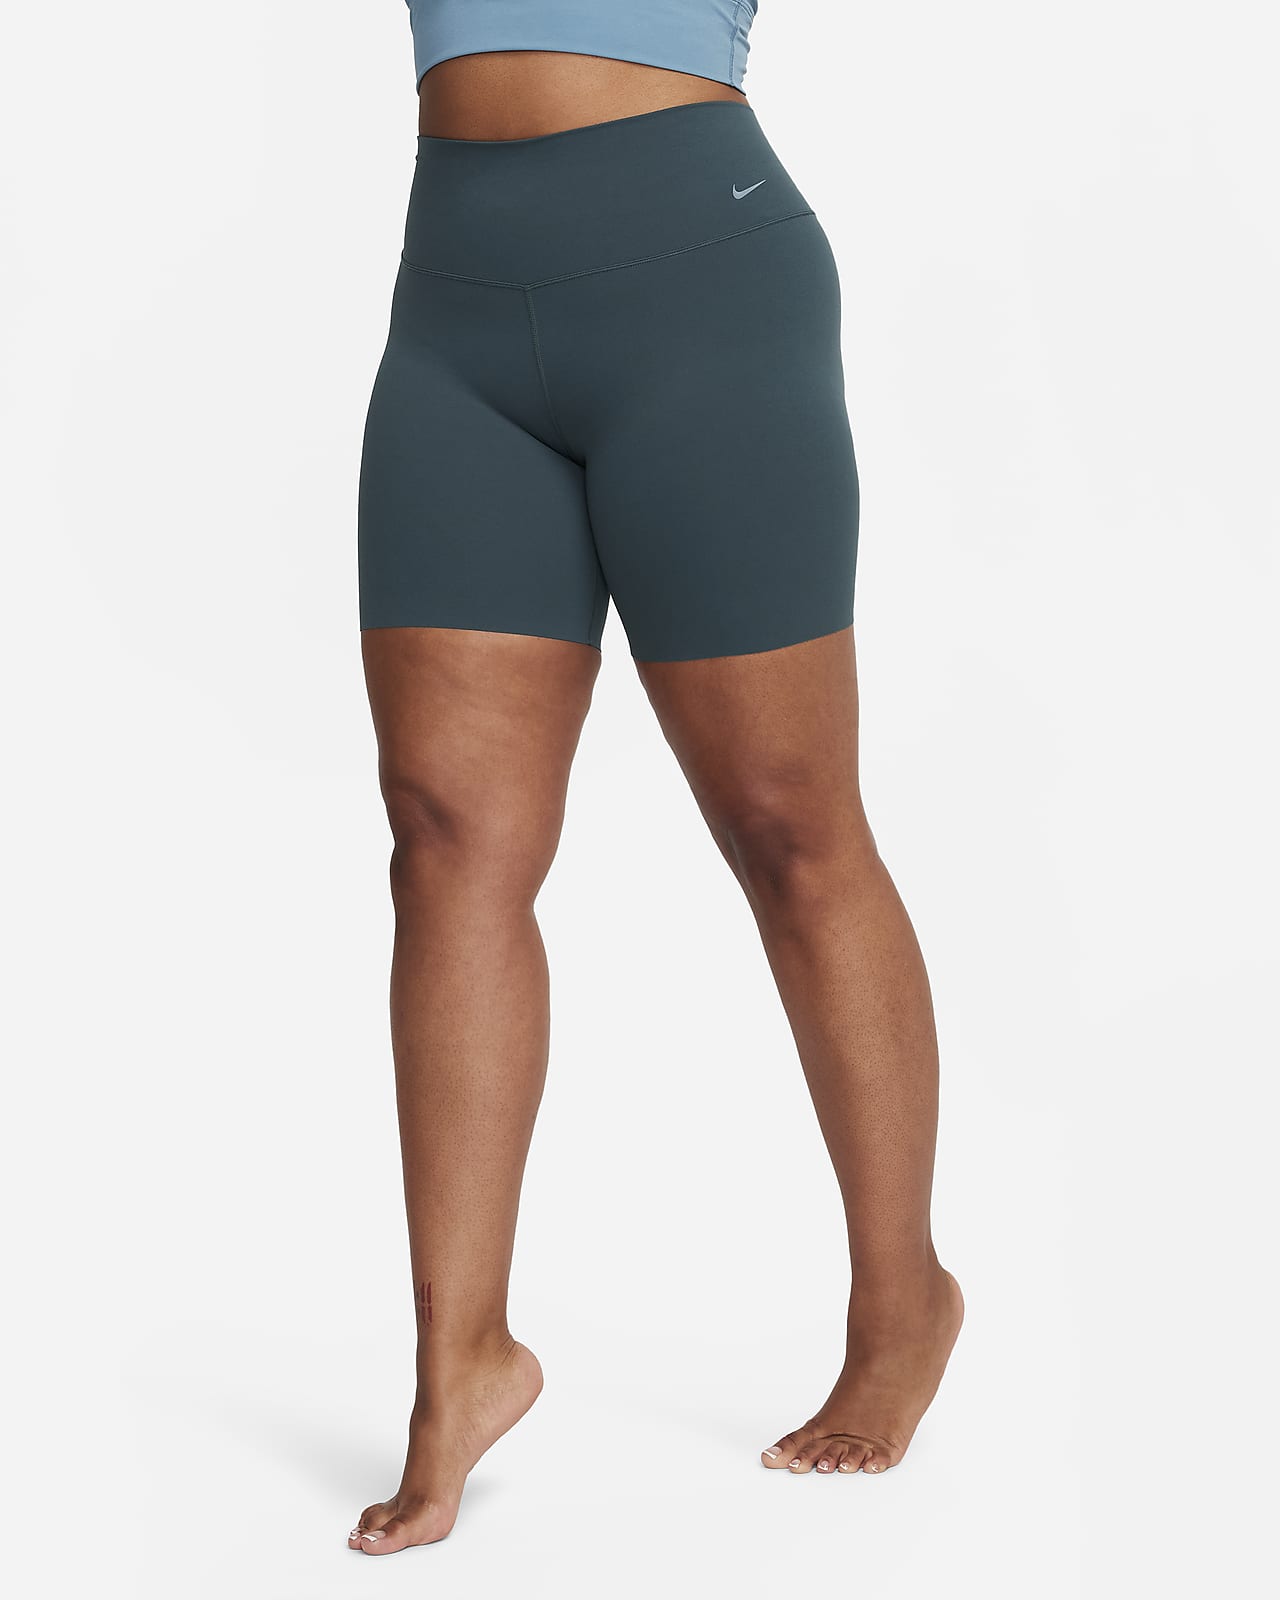 Women's Yoga Shorts 5 Inch Inseam Eco Friendly Booty Shorts Organic  Clothing Blue Available in Several Colors 